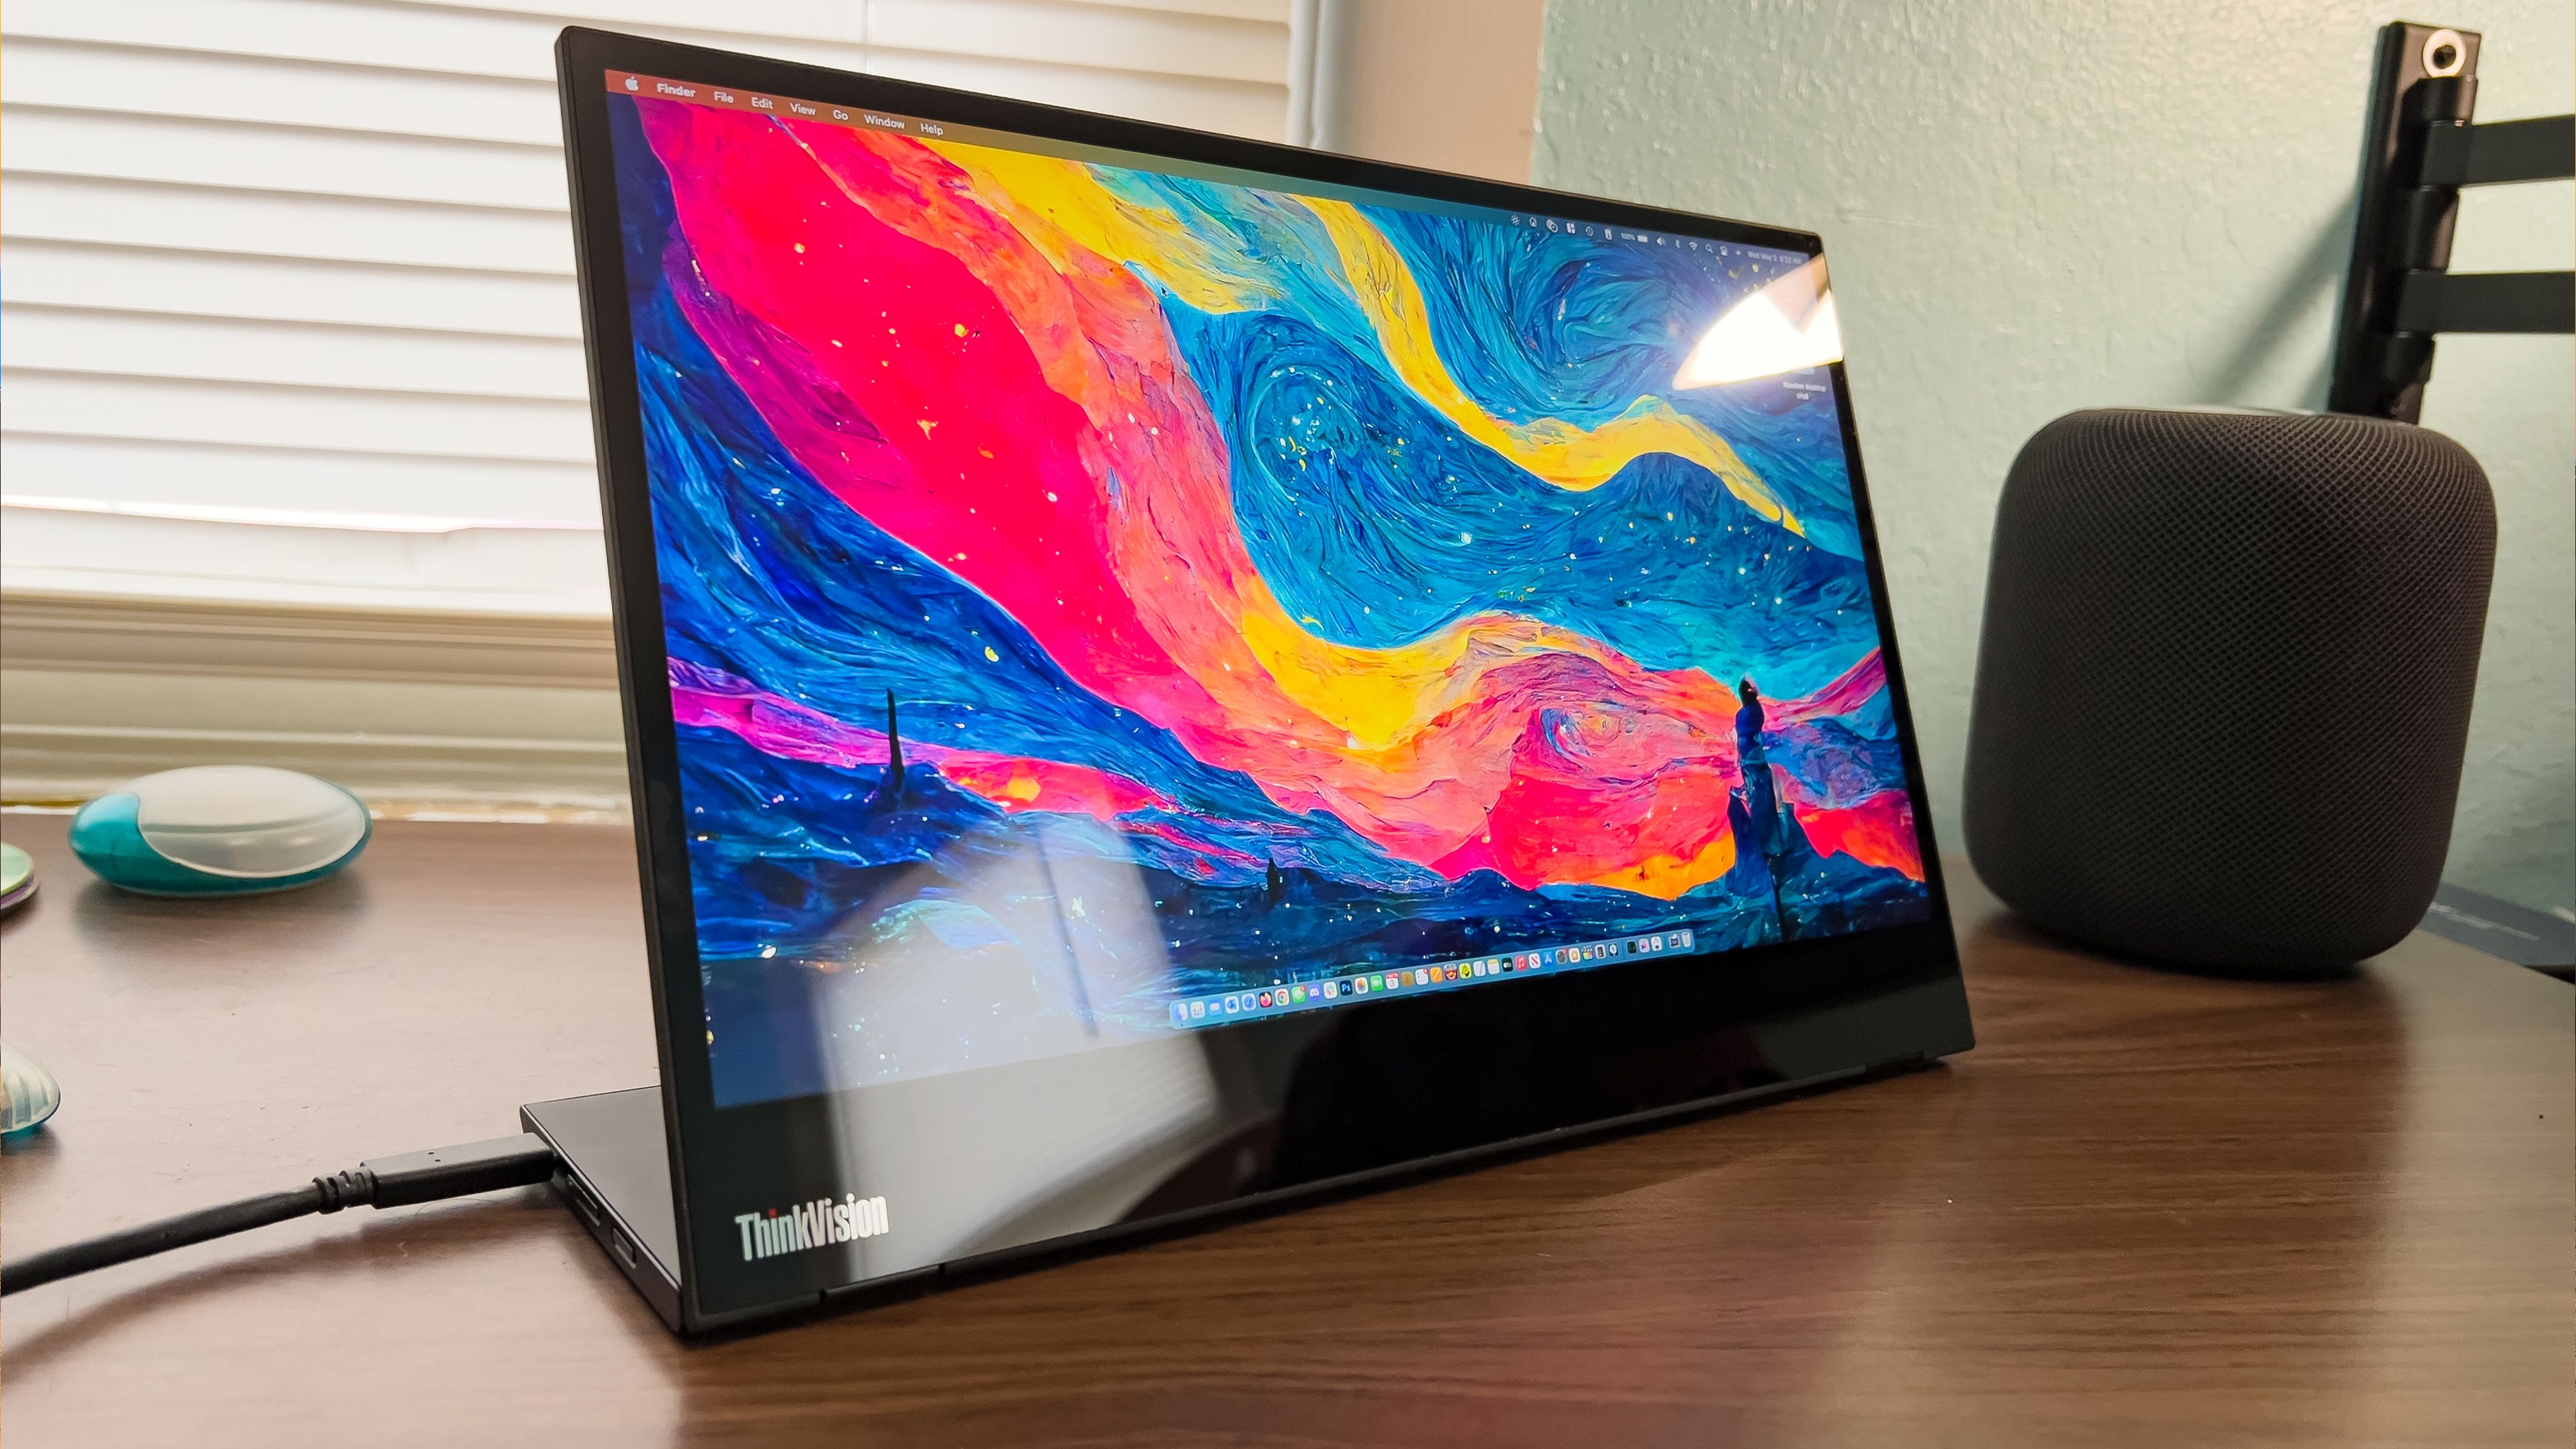 Consumer Reports shares the best portable laptop monitors for your money 